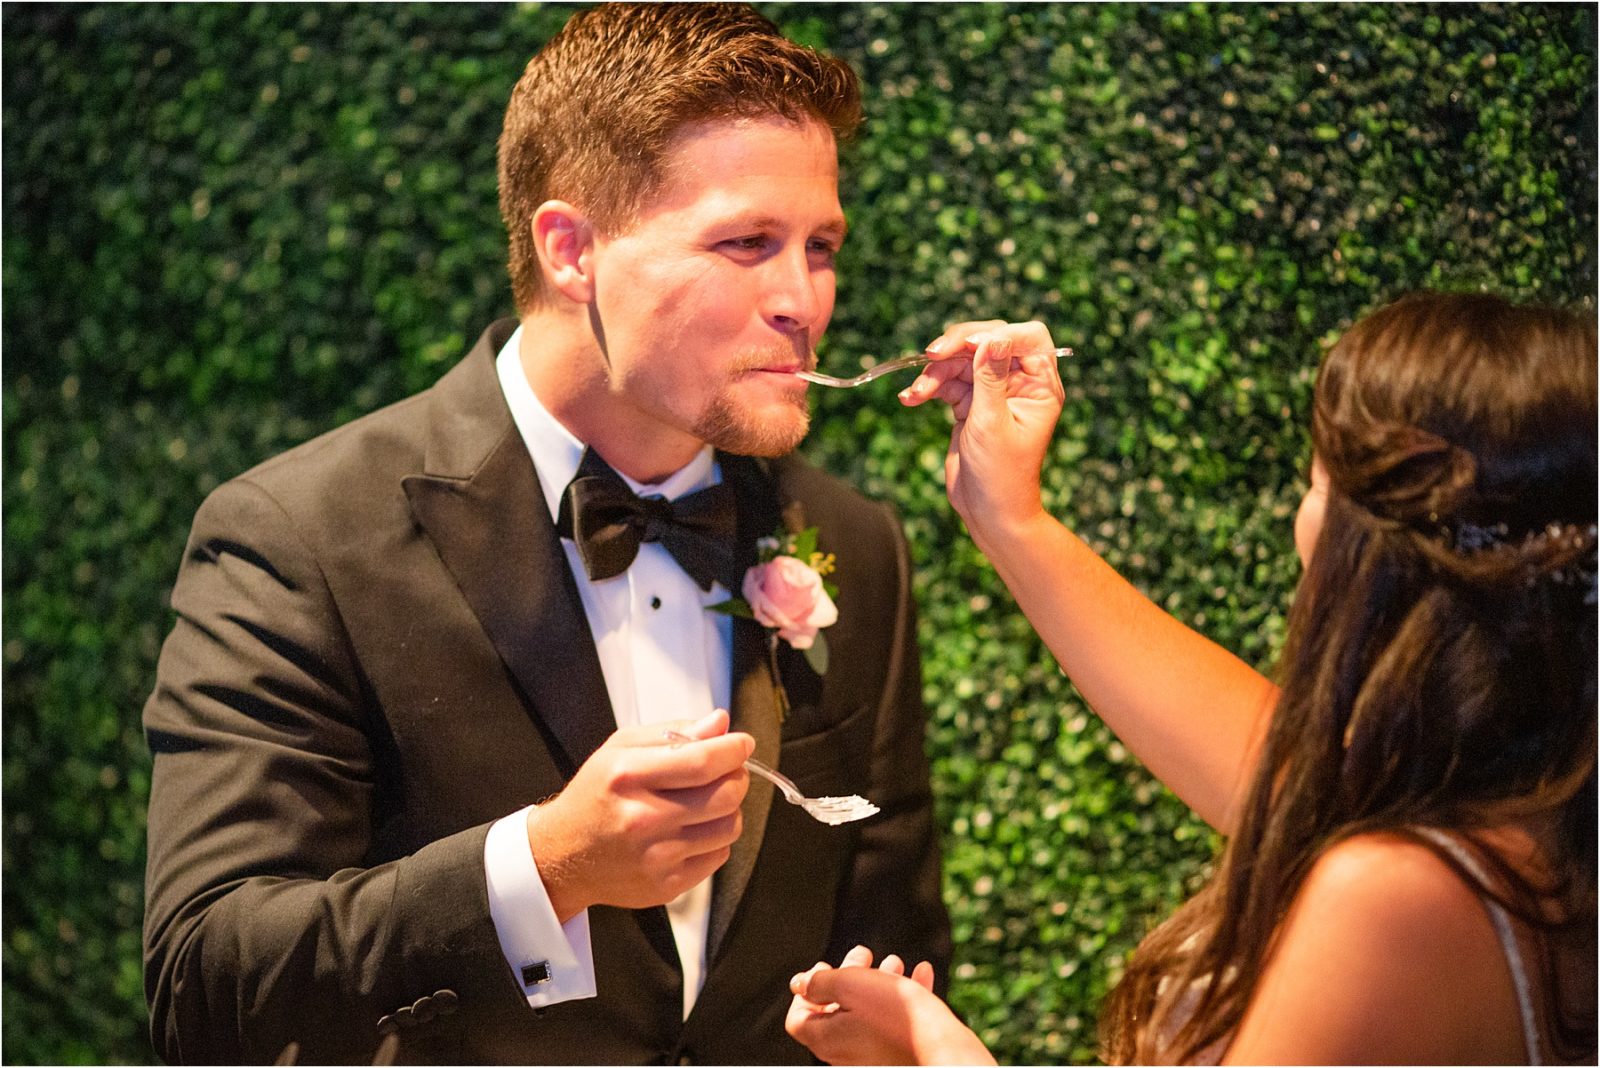 Groom smiling as his new bride feeds him cake